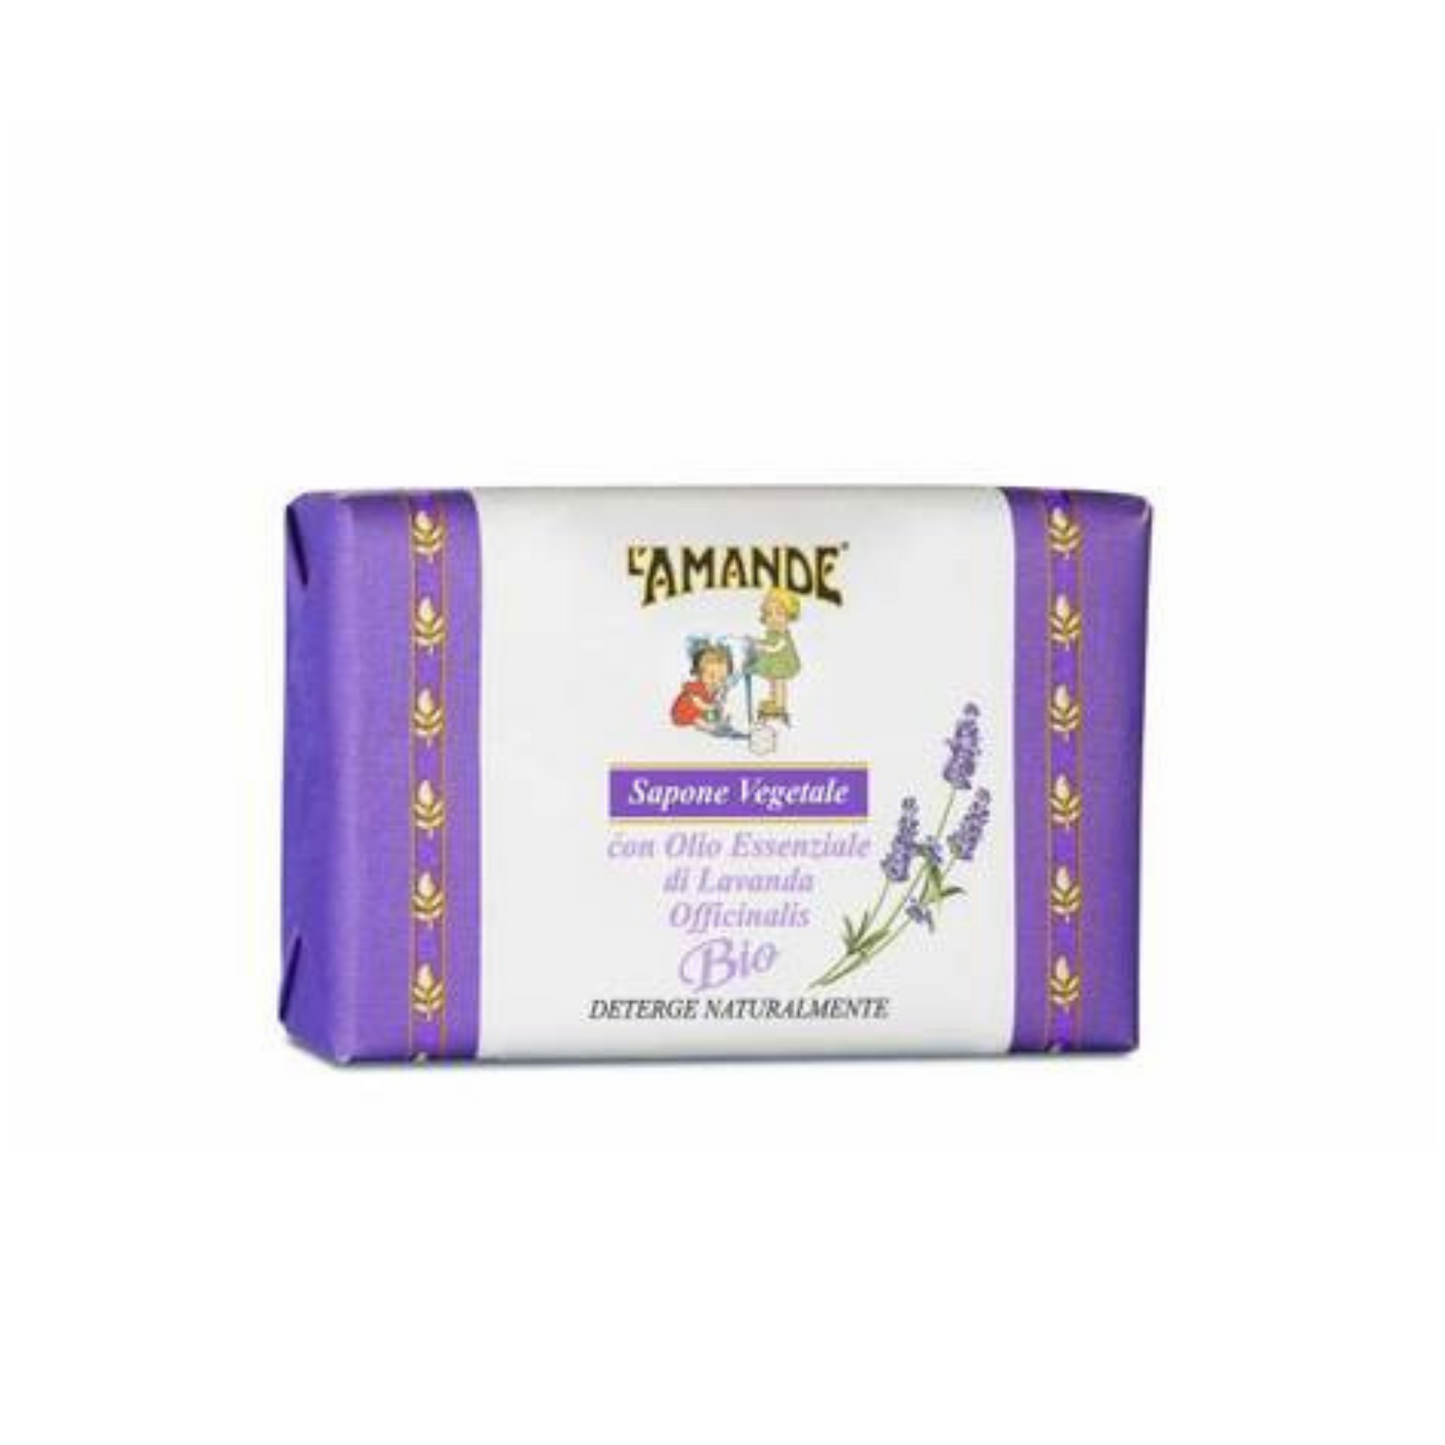 Primary Image of Lavender Bar Soap